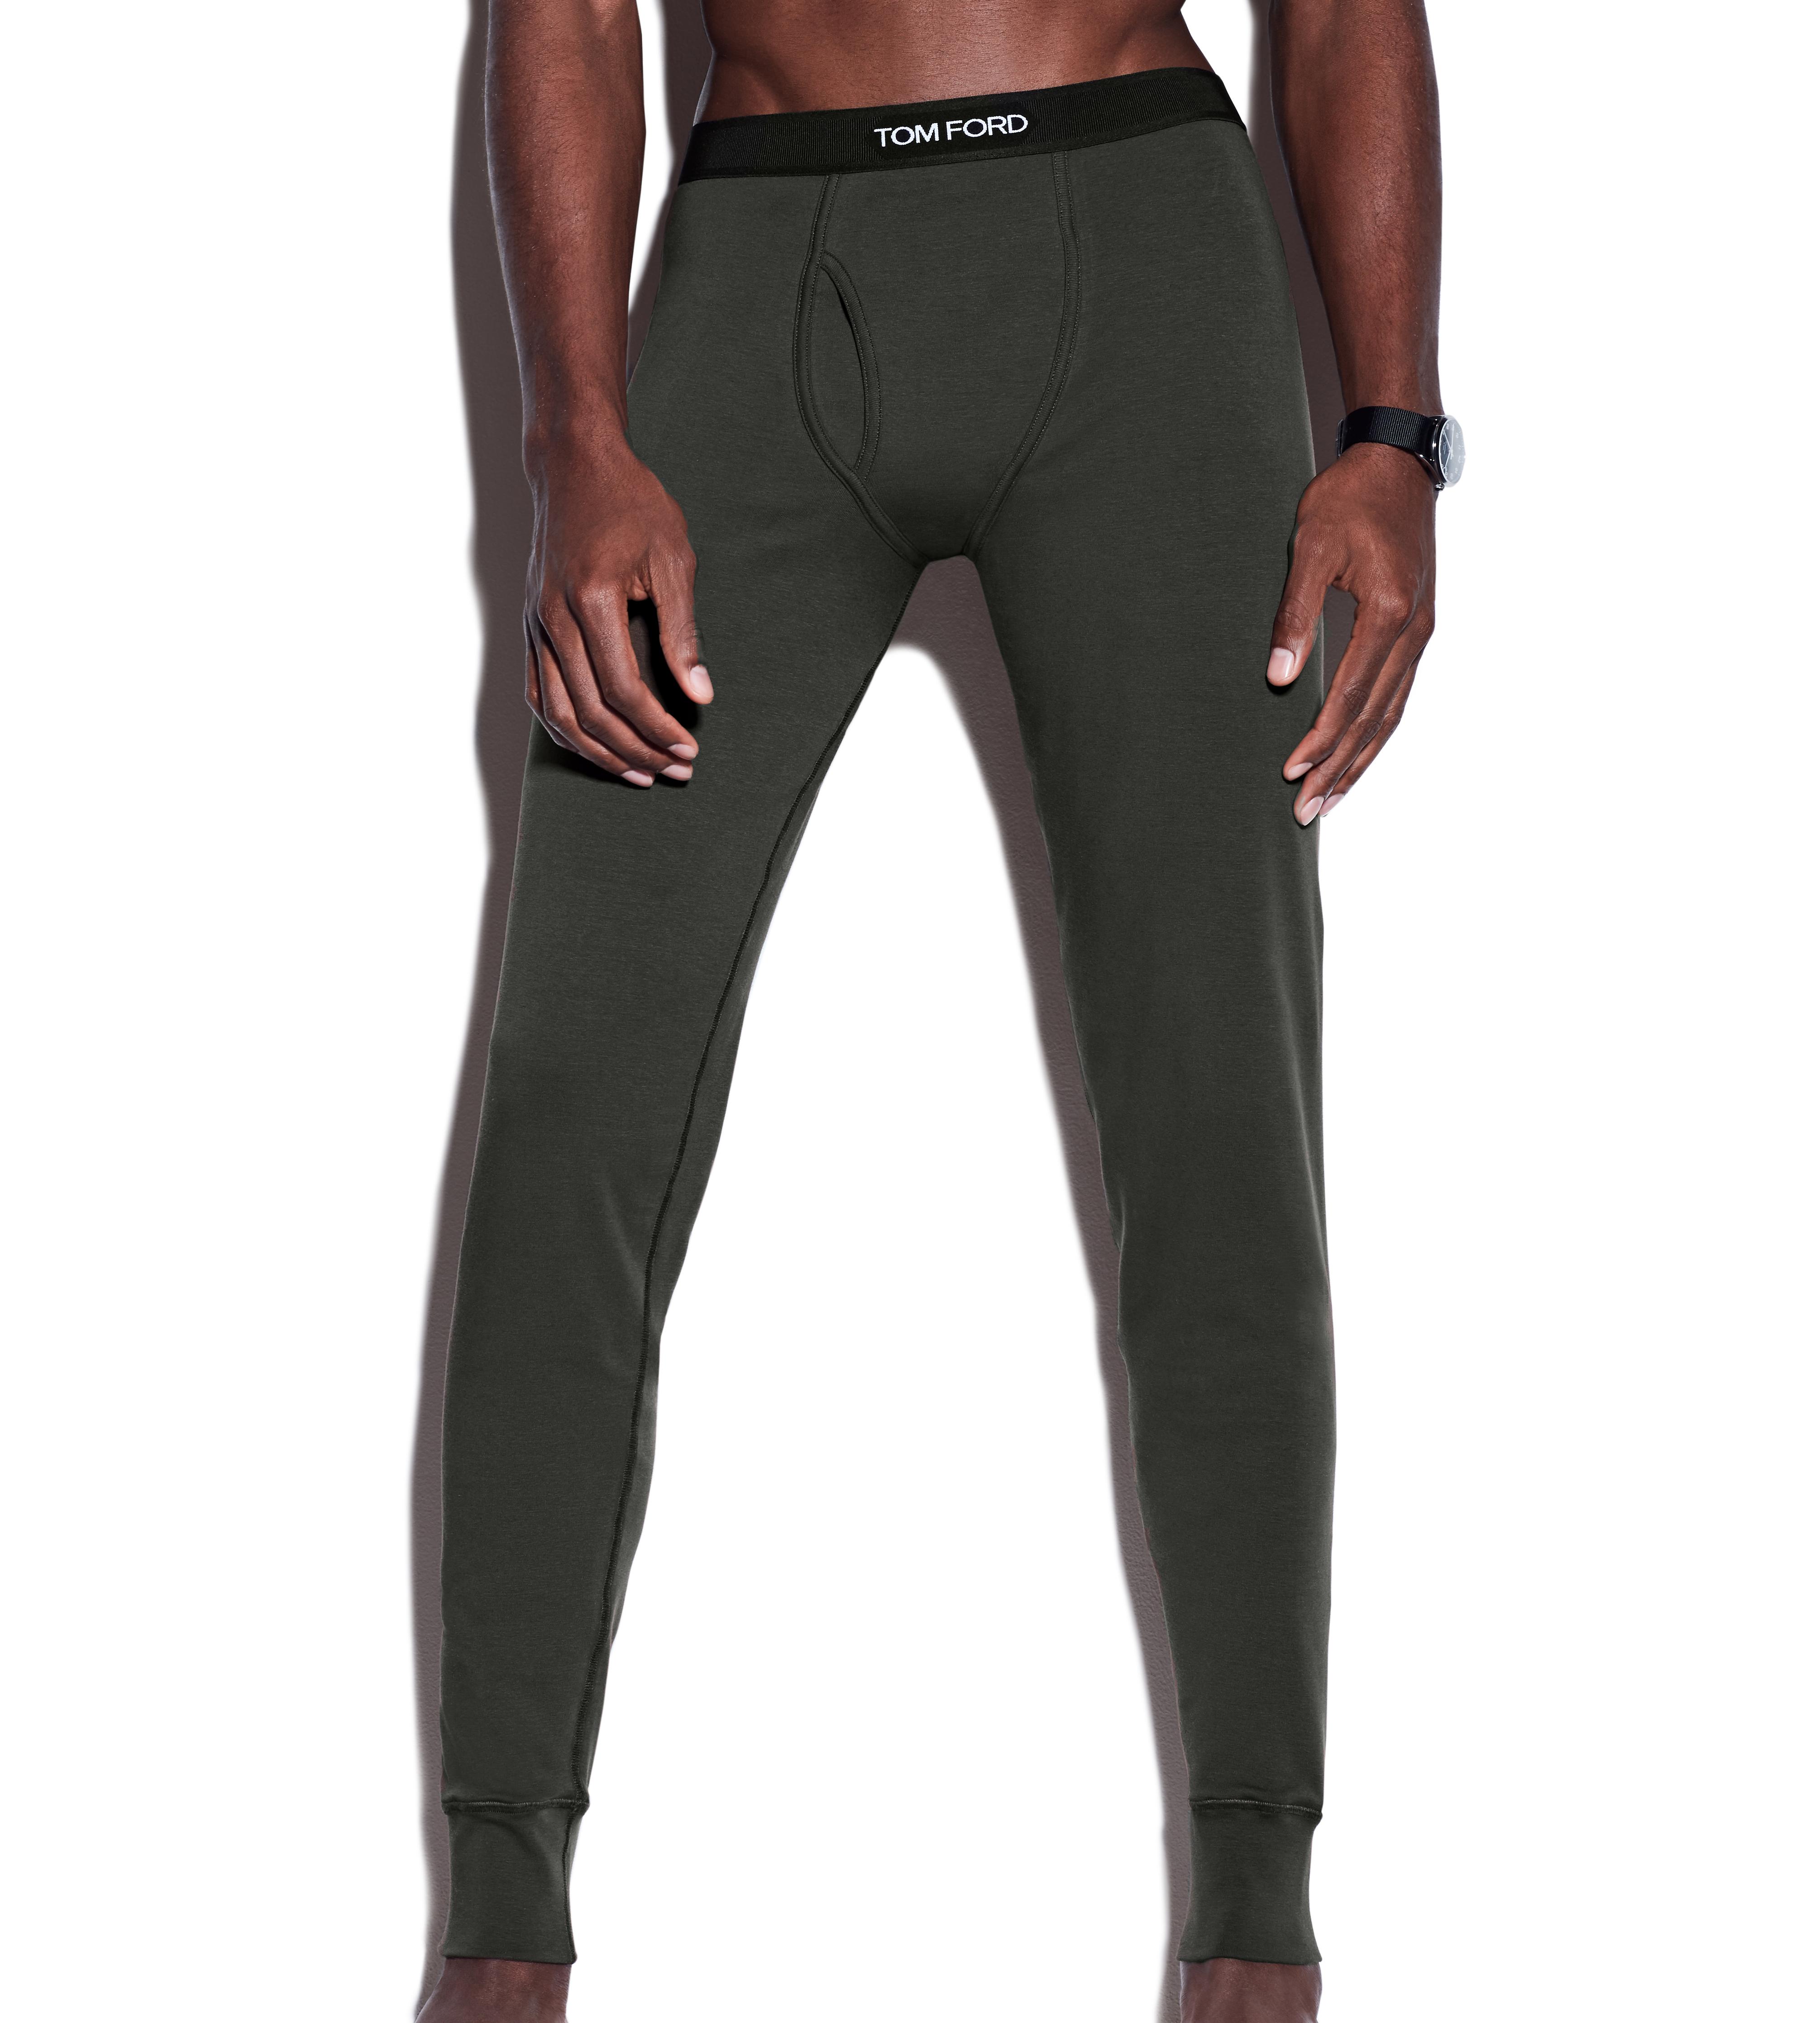 Tom Ford COTTON LONG JOHNS 